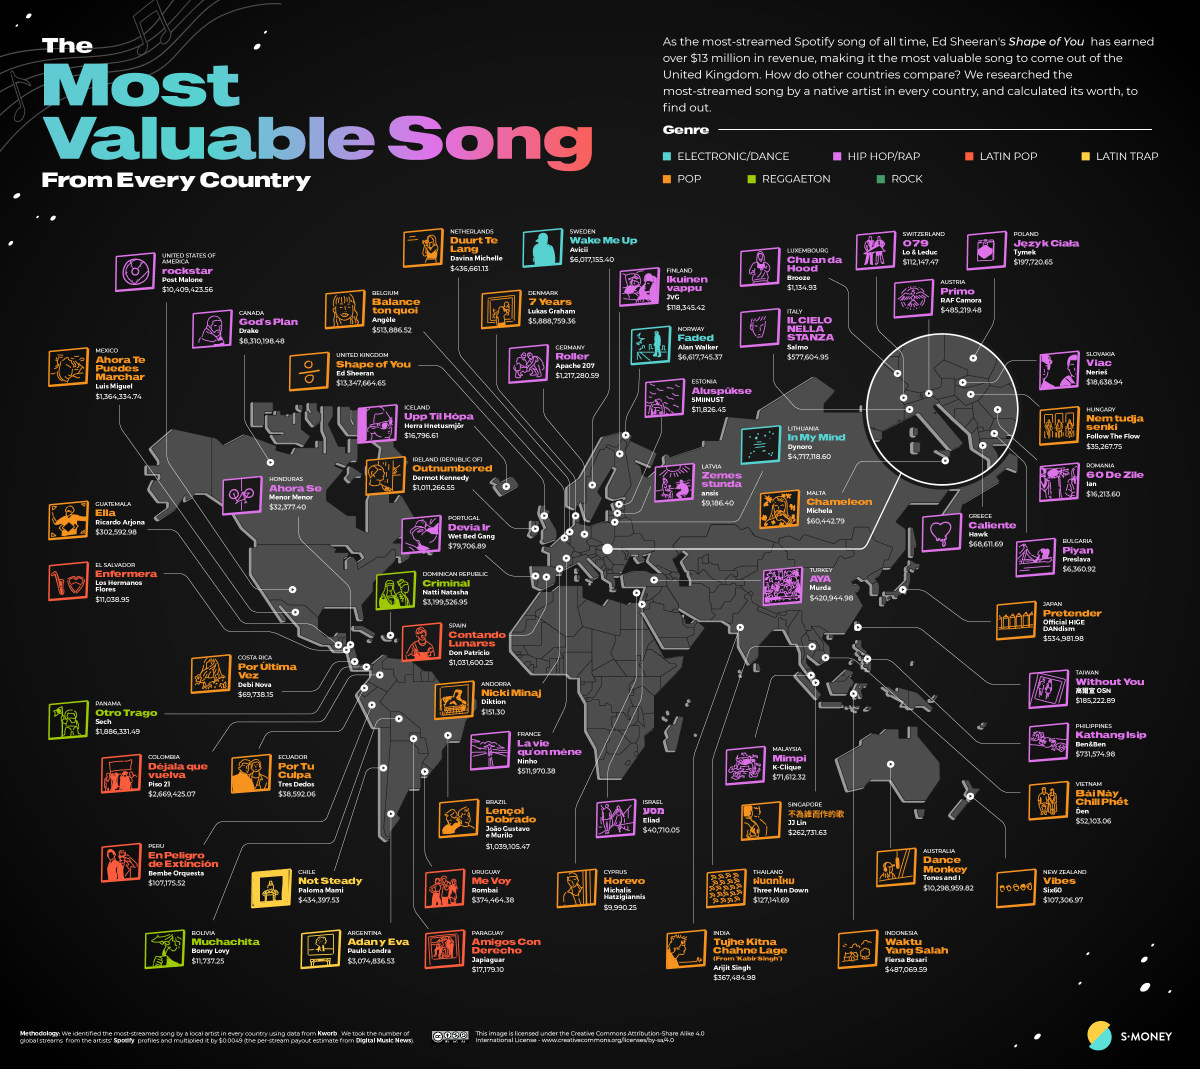 The most valuable song from every country, according to a study by S-Money.